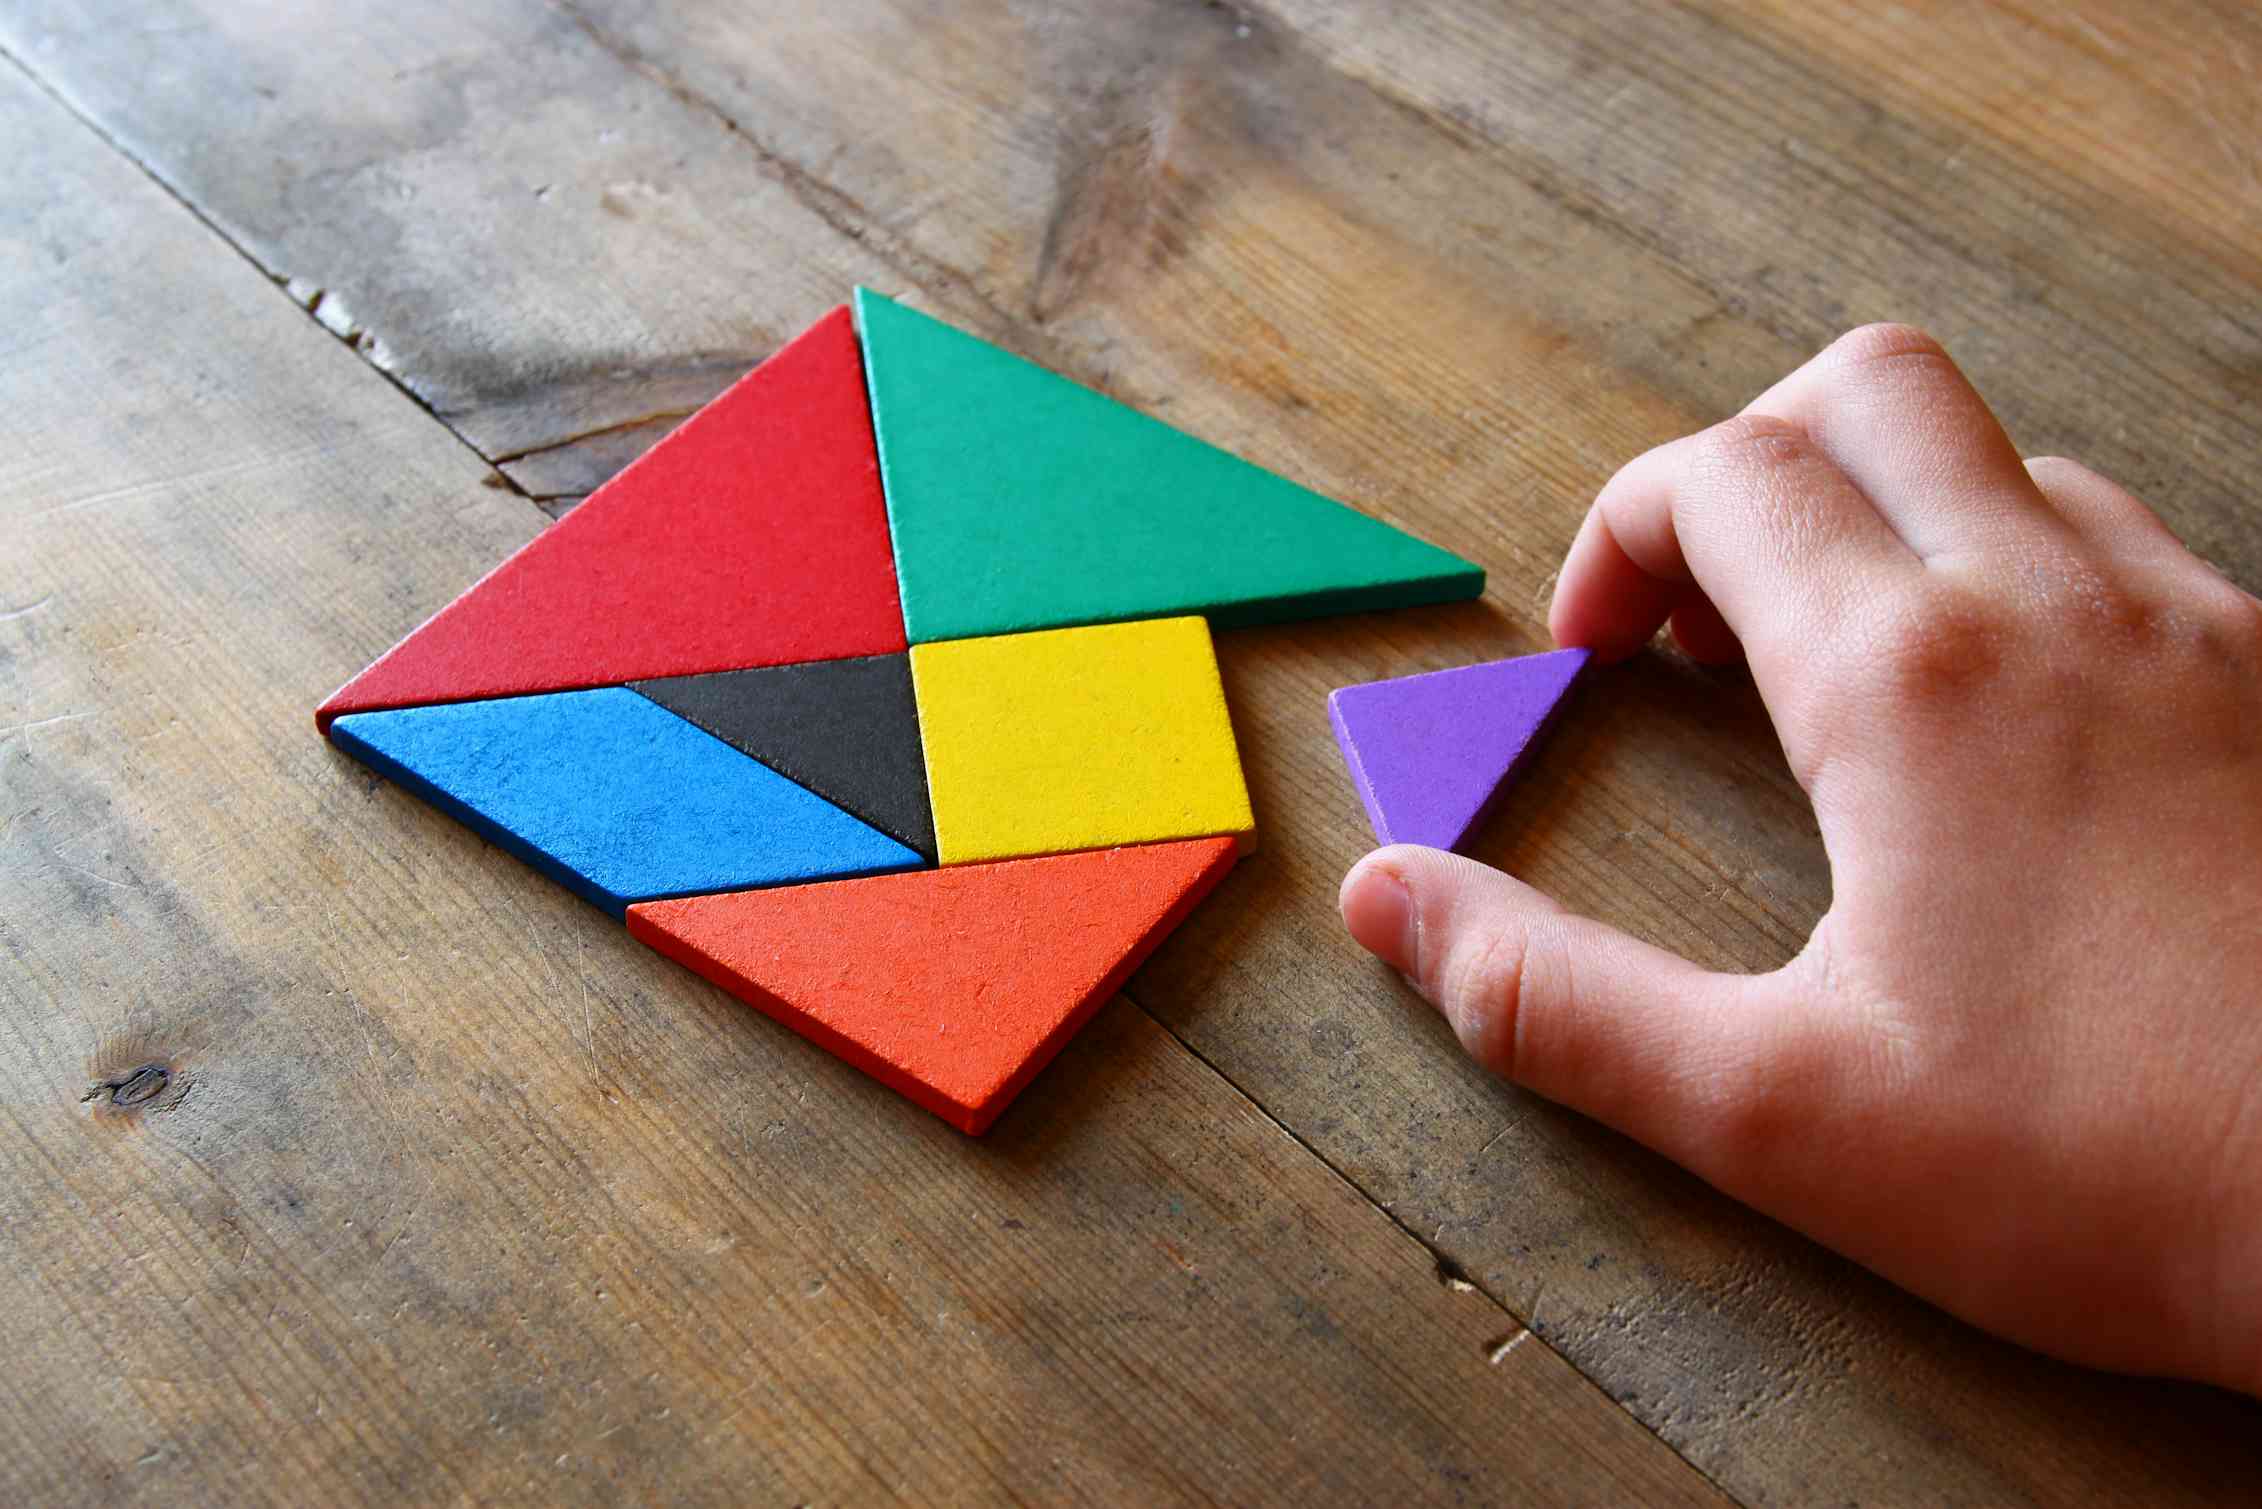 A Tangram puzzle lies on a table.